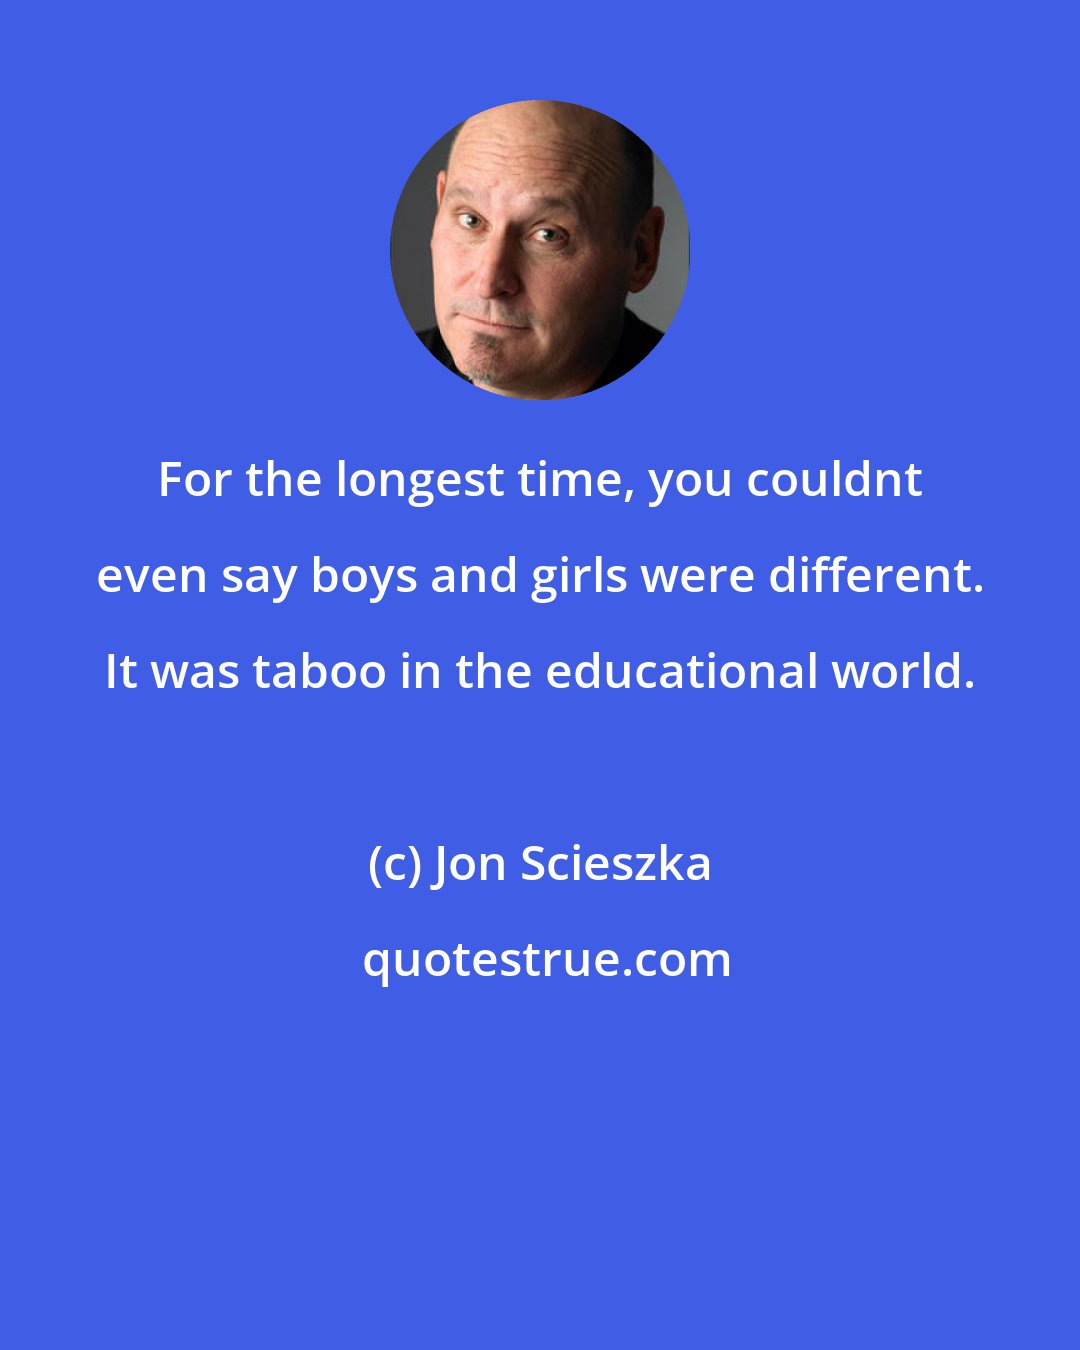 Jon Scieszka: For the longest time, you couldnt even say boys and girls were different. It was taboo in the educational world.